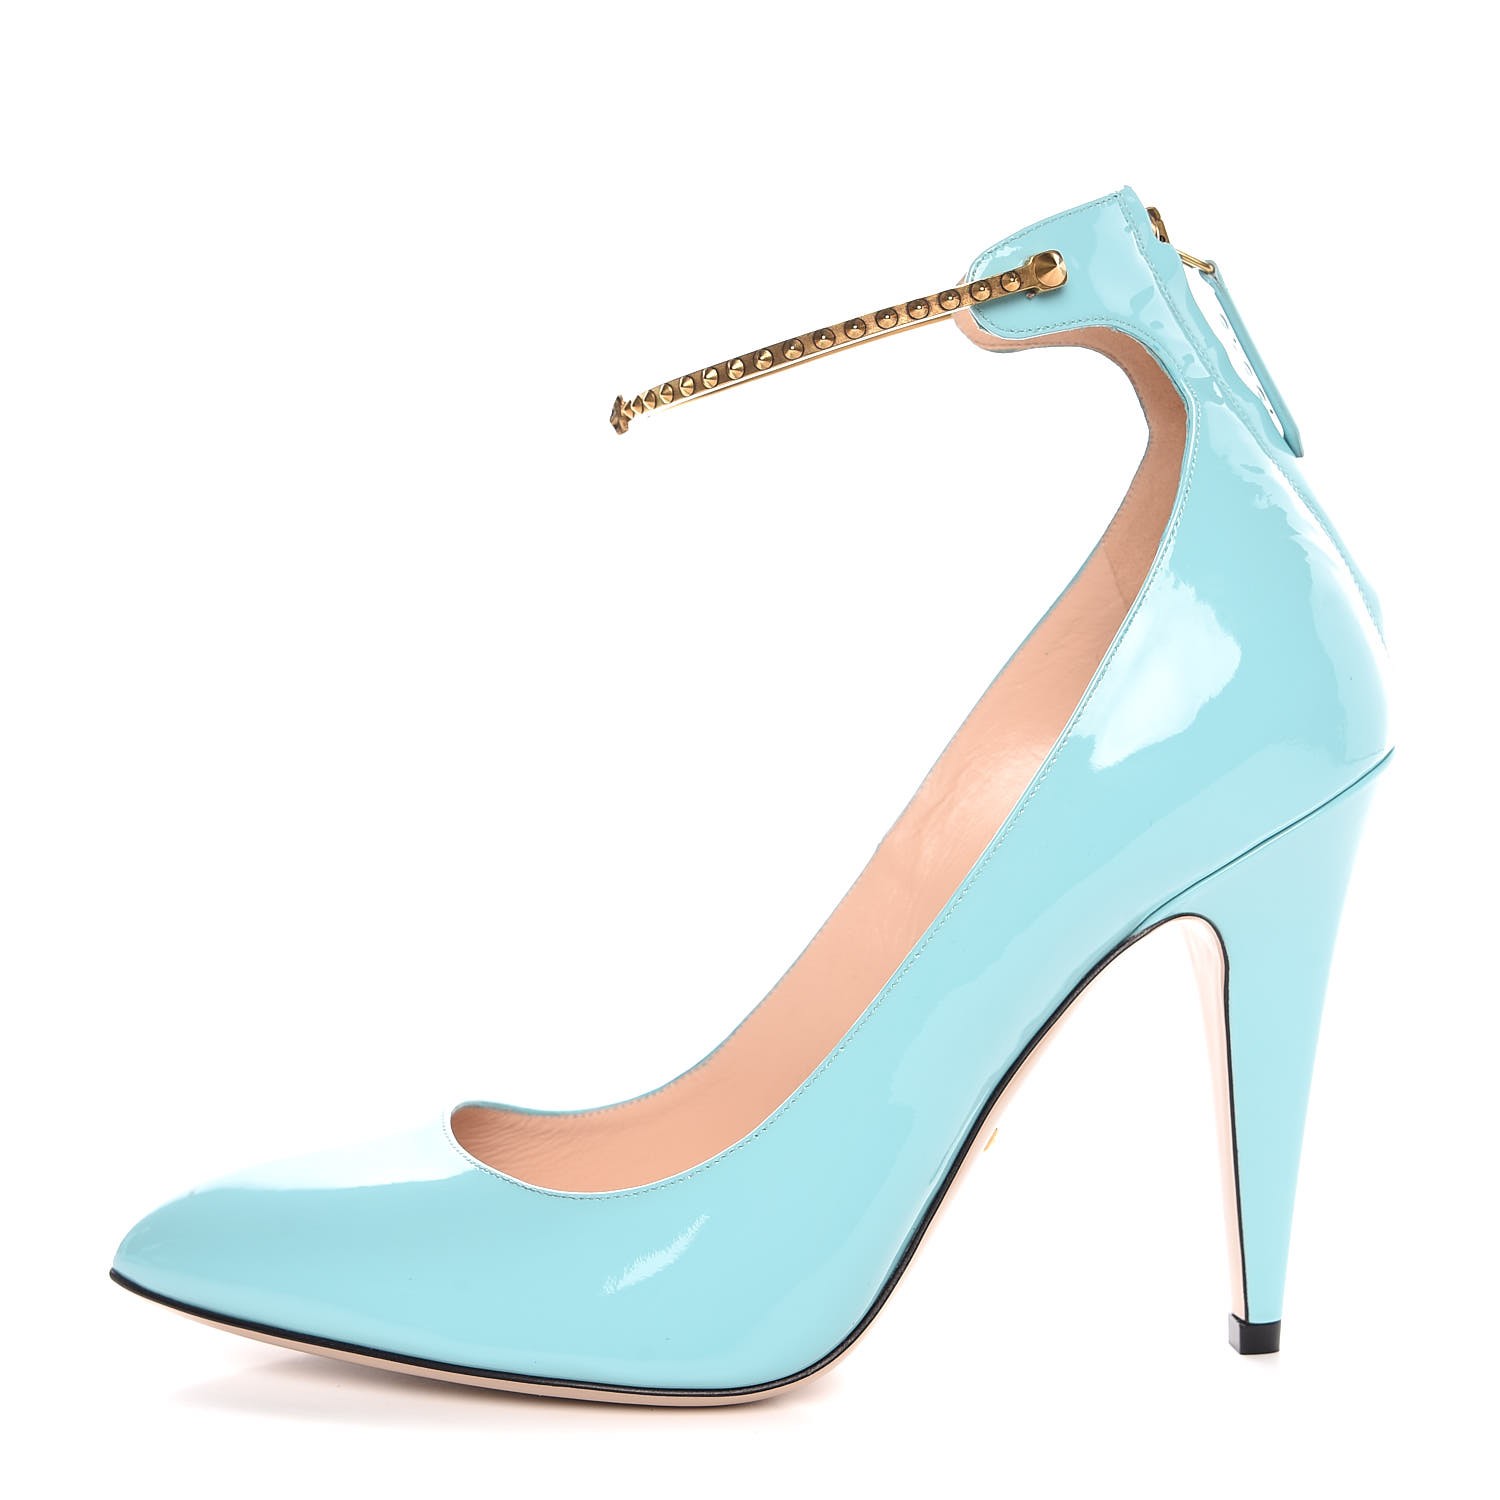 GUCCI Vernice Crystal Ankle Strap Pumps 40.5 New Aquamarine 344250